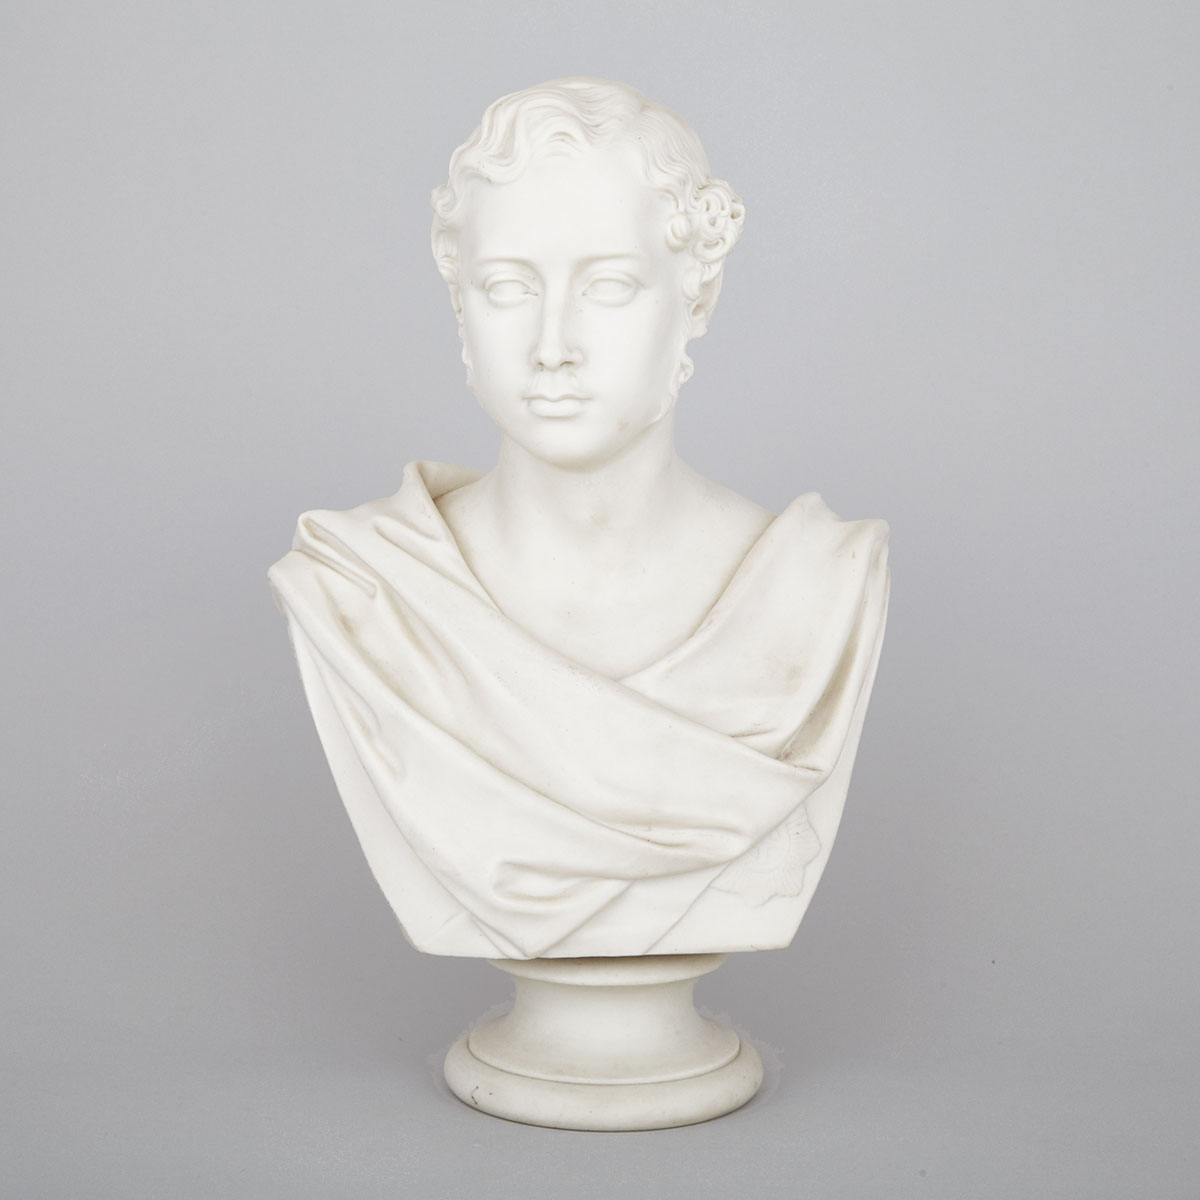 Copeland Parian Bust of Edward, Prince of Wales, after Wood, 19th century